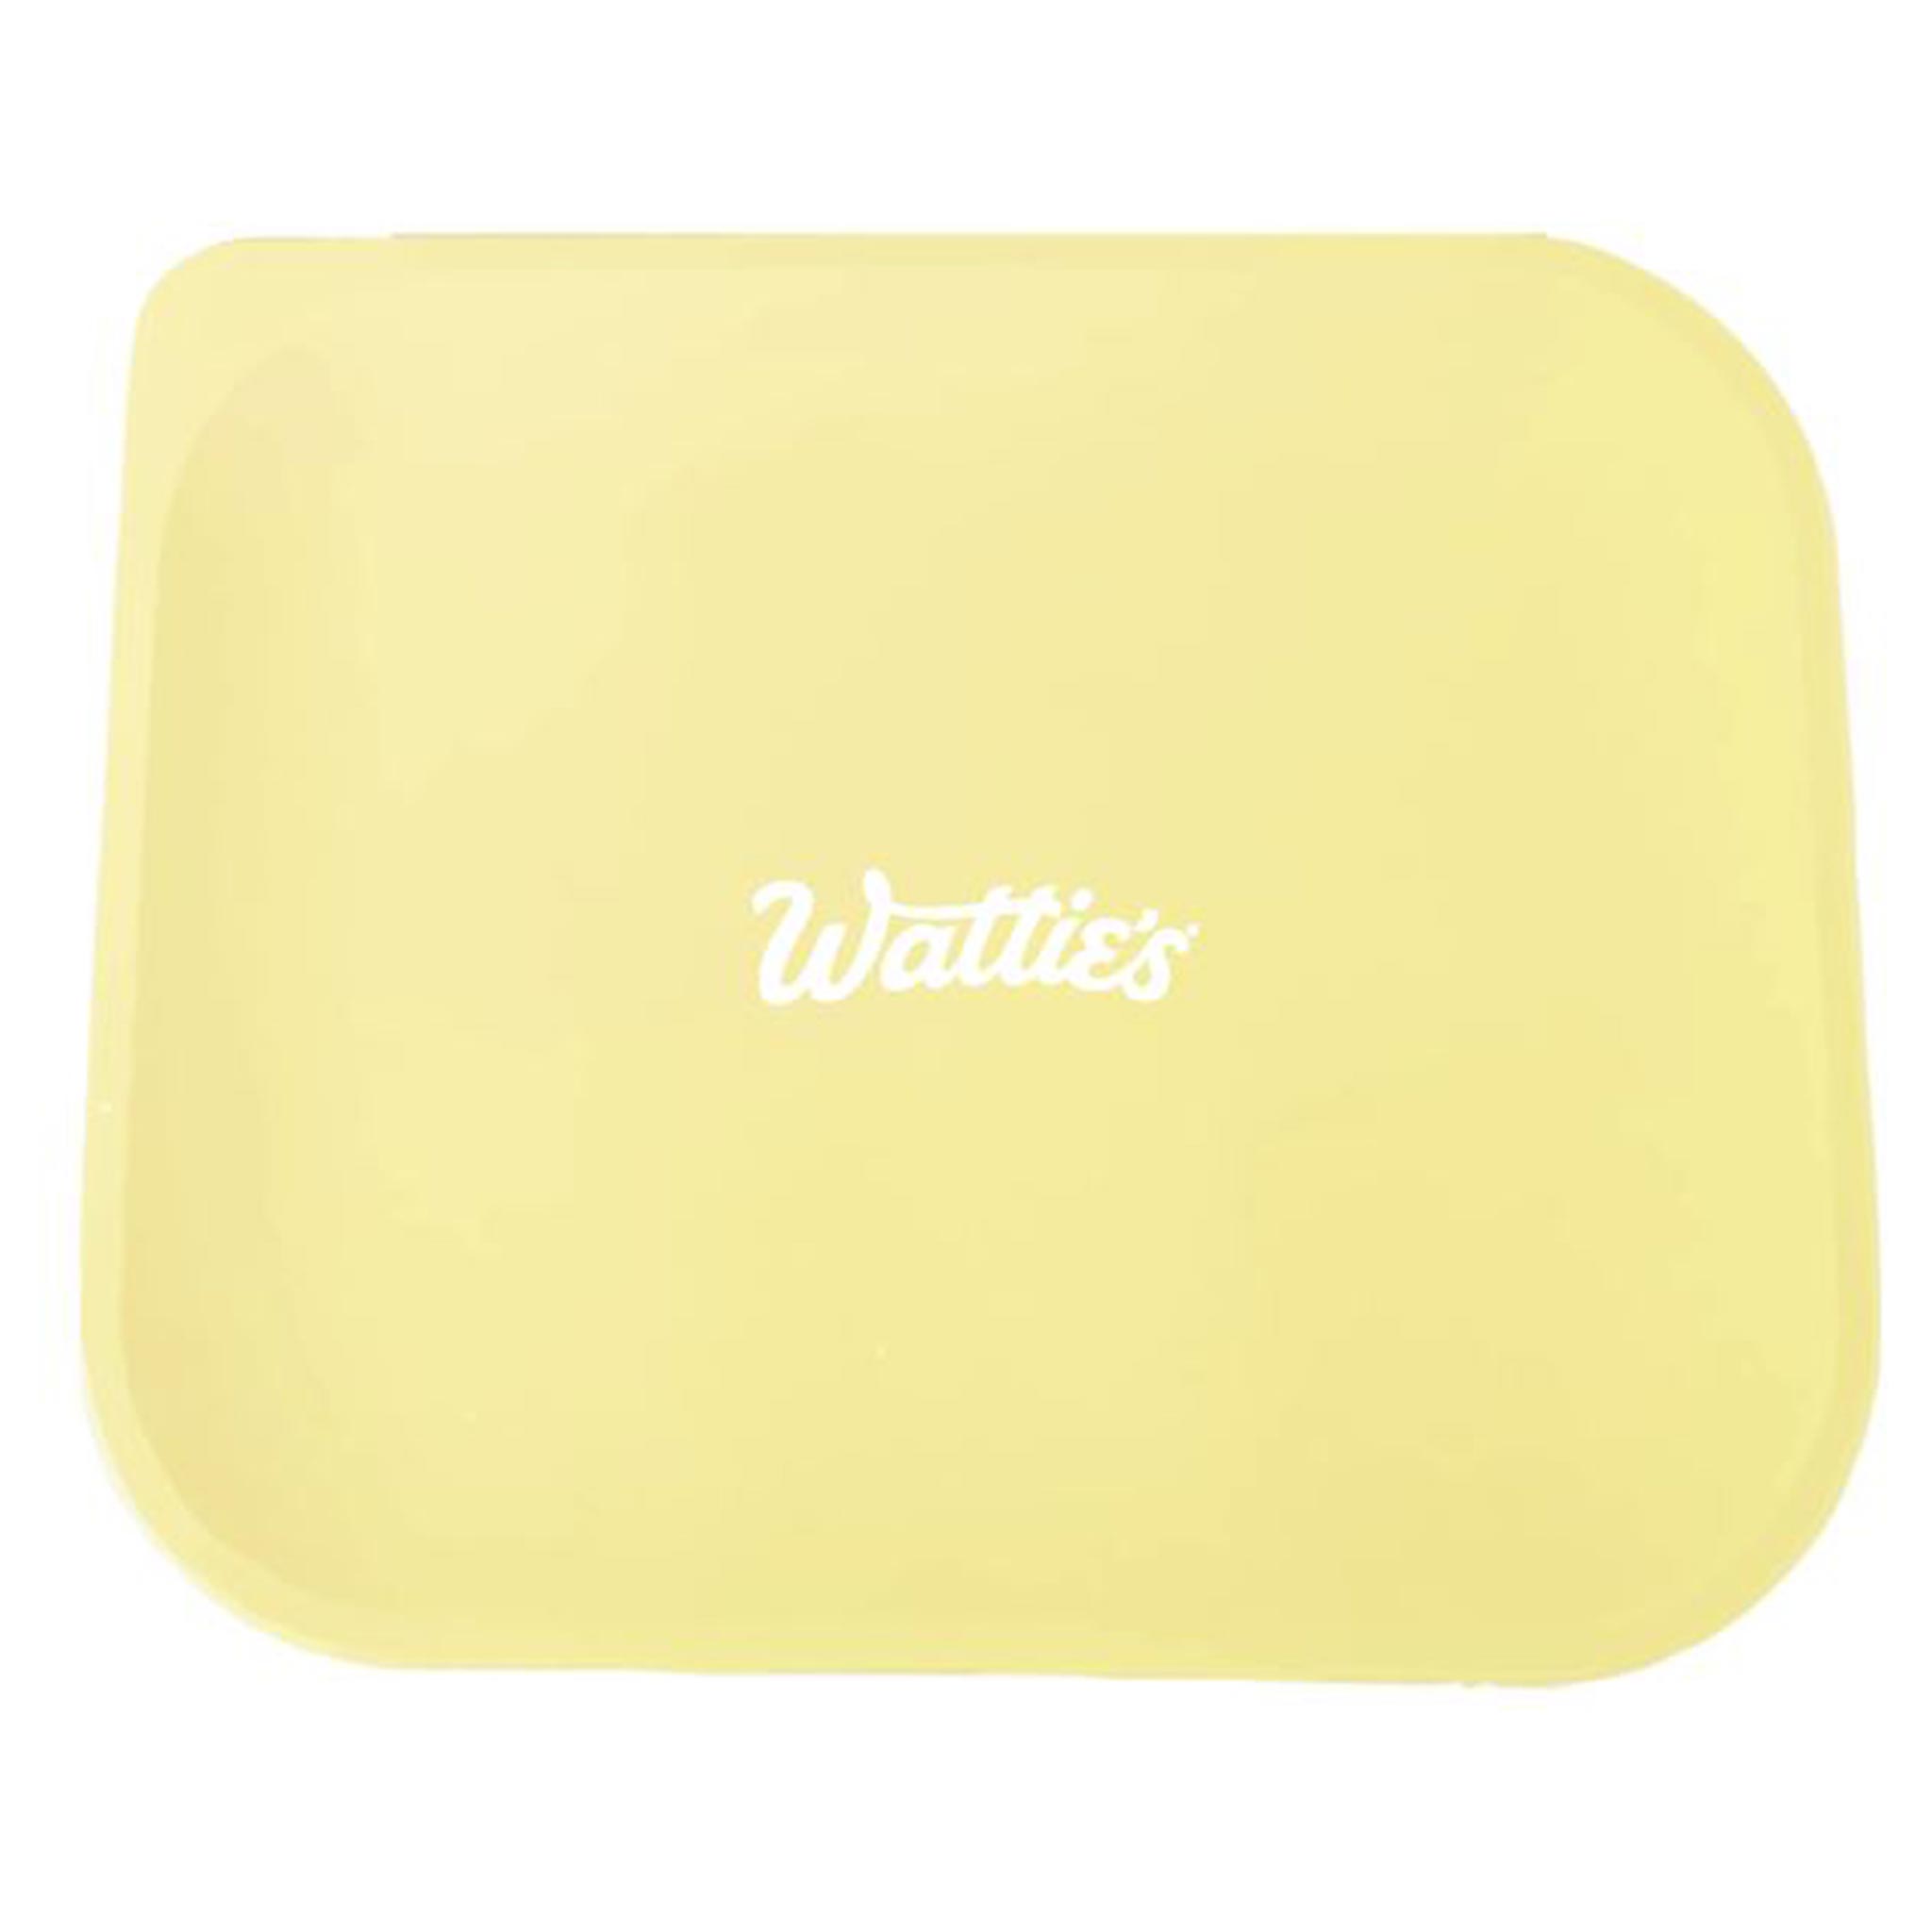 Photograph of Wattie's Branded Snack Container (Light Yellow) product